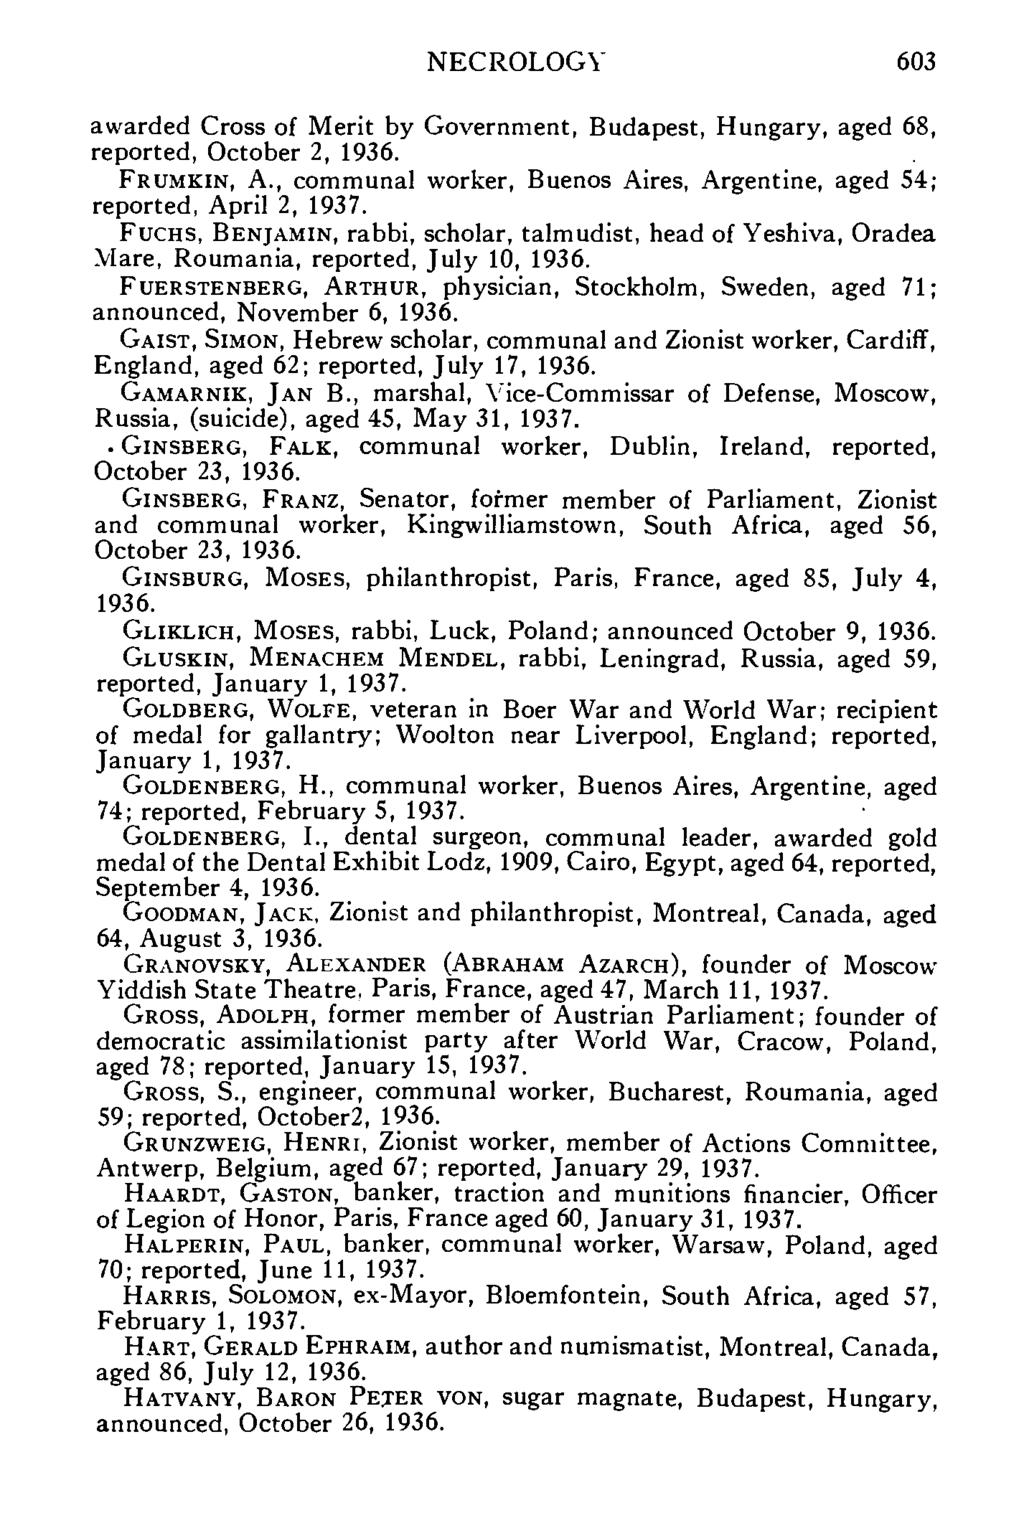 NECROLOGY 603 awarded Cross of Merit by Government, Budapest, Hungary, aged 68, reported, October 2, 1936. FRUMKIN, A., communal worker, Buenos Aires, Argentine, aged 54; reported, April 2, 1937.